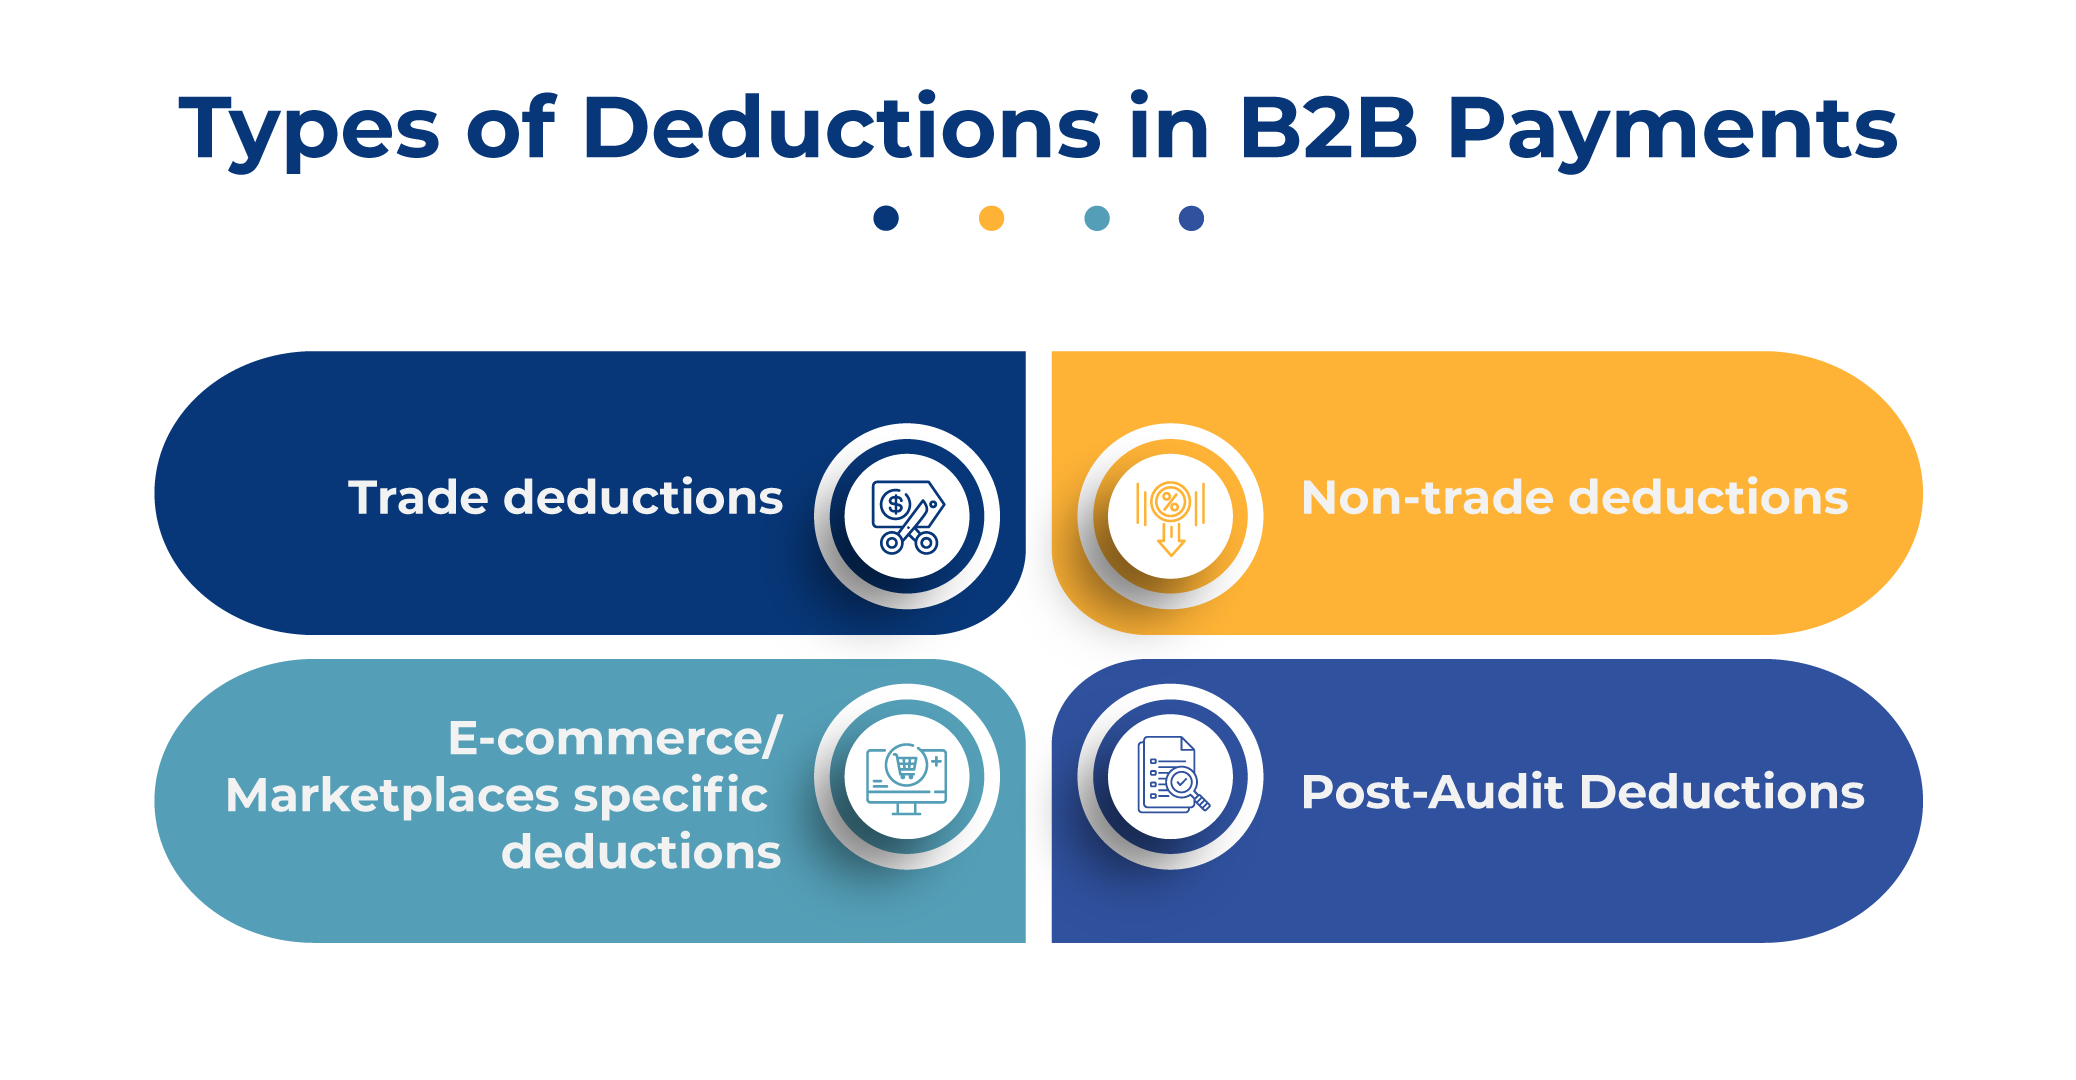 Types of Deductions in B2B Payments